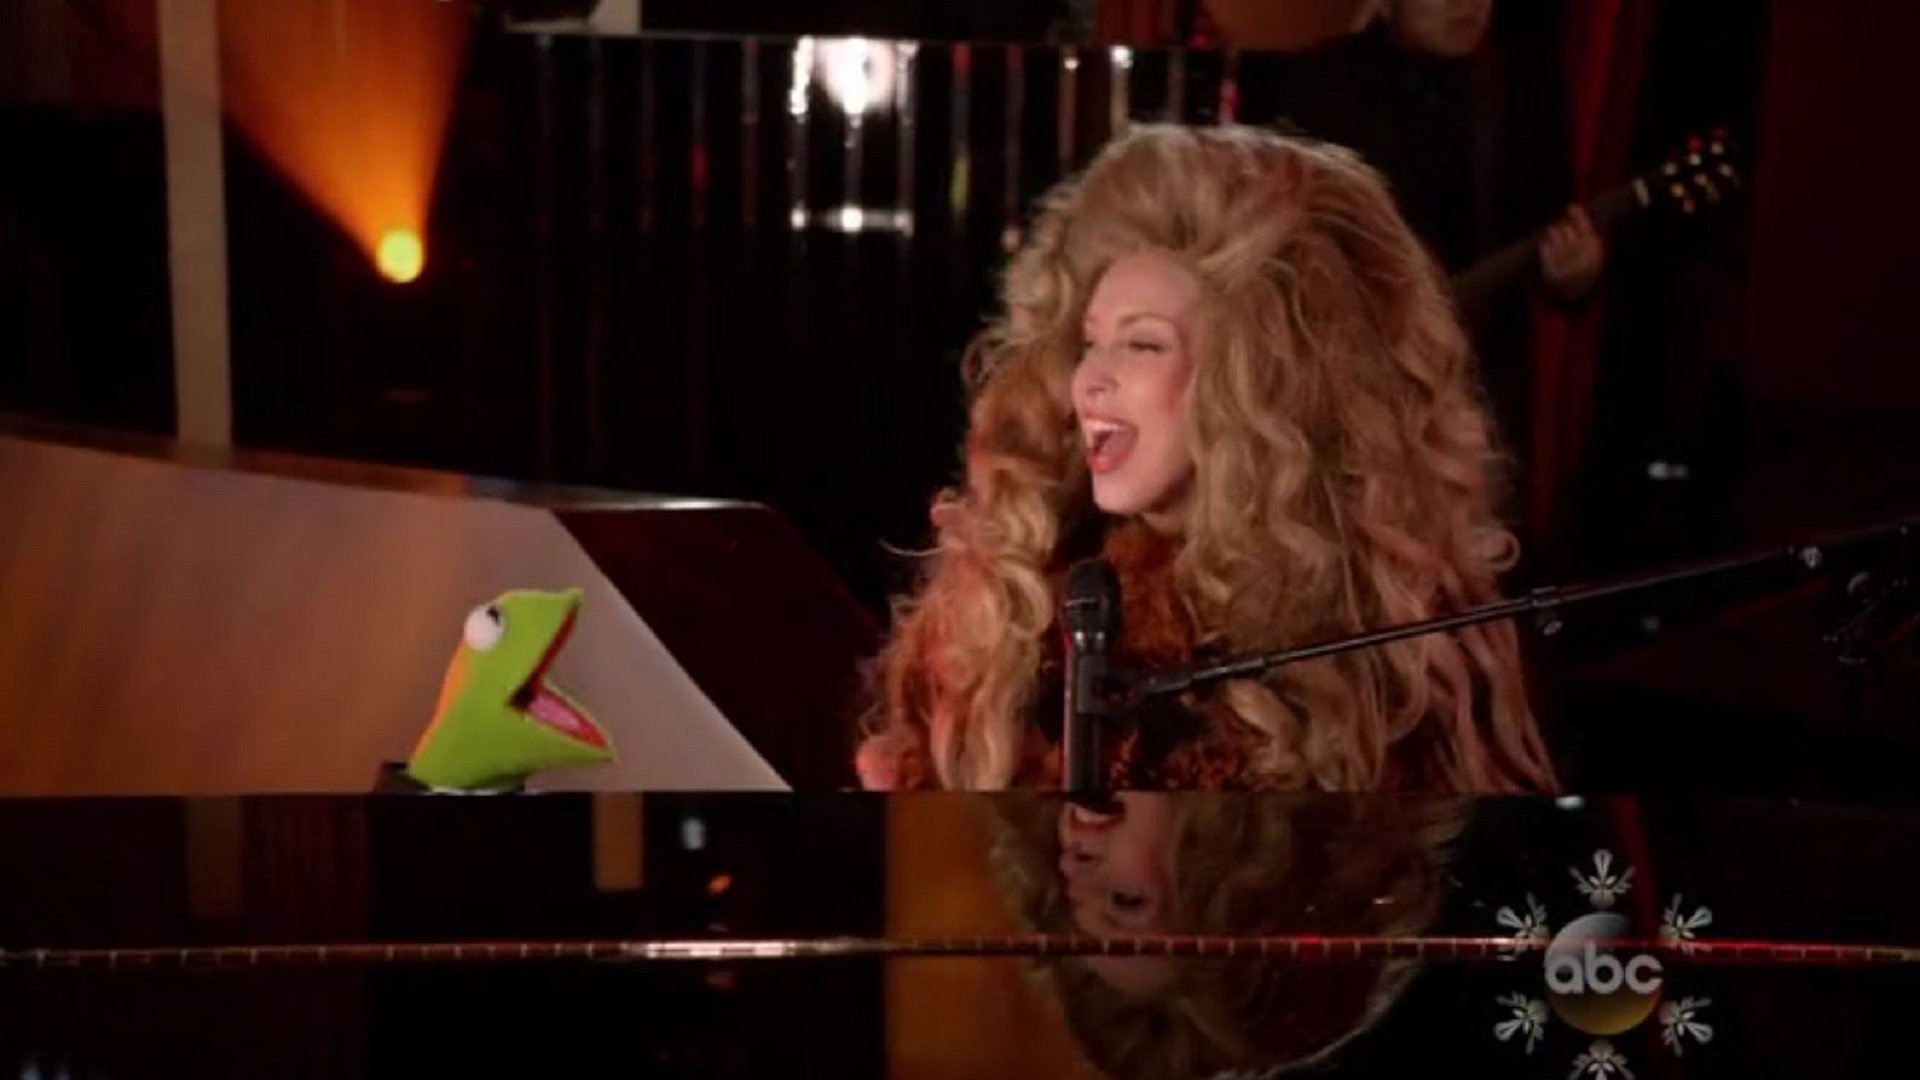 Lady Gaga & the Muppets' Holiday Spectacular